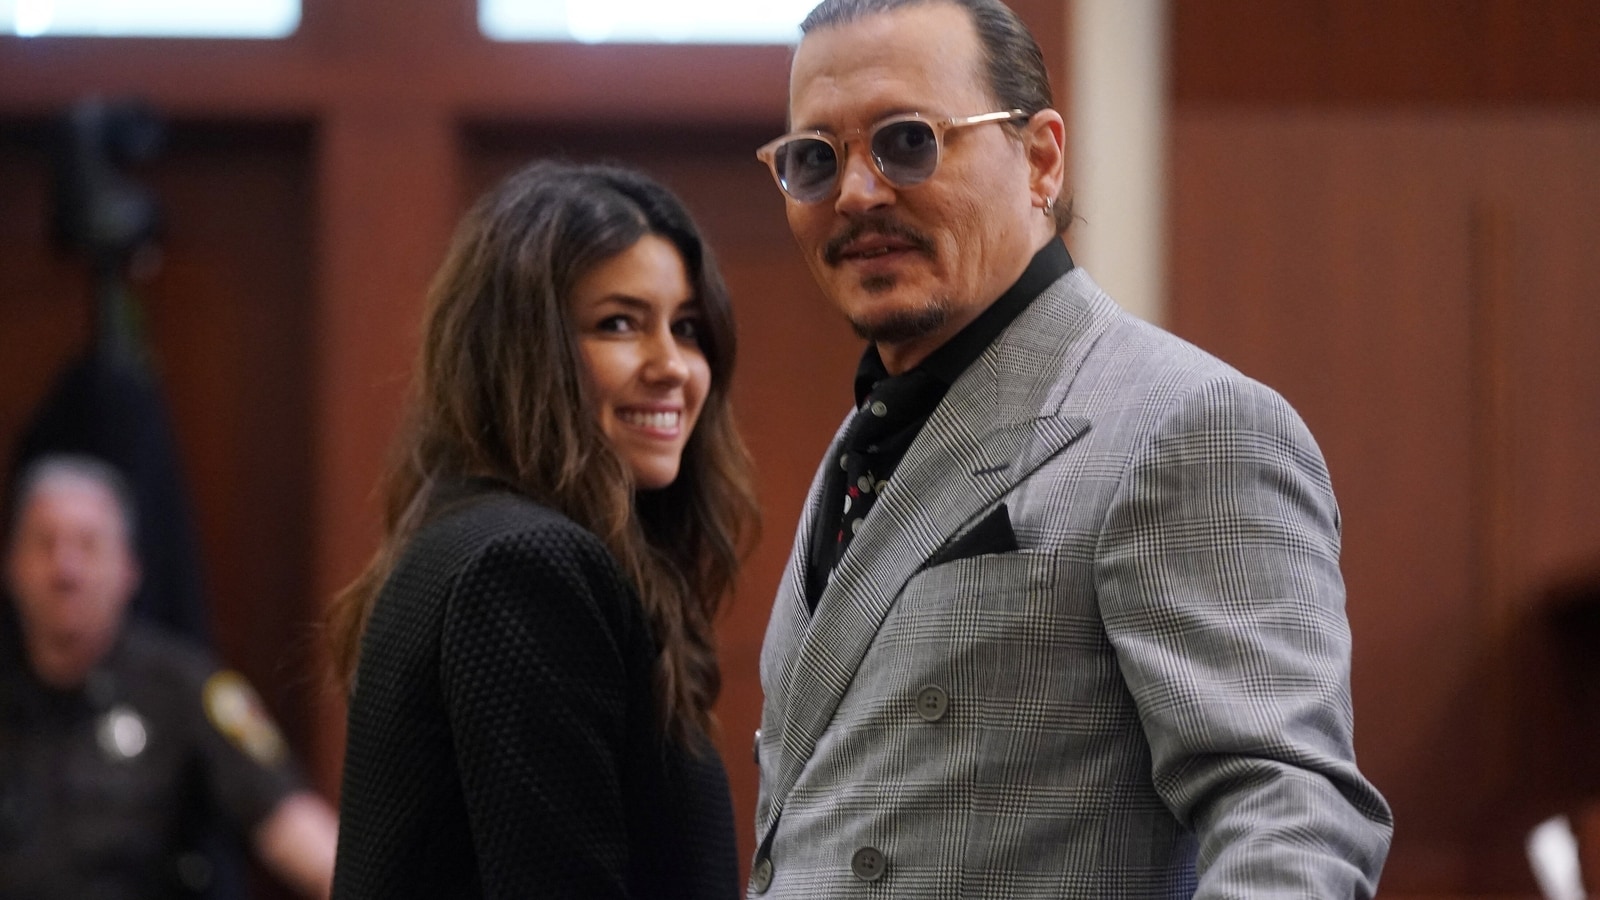 Johnny Depp’s lawyer Camille Vasquez calls reports of her dating actor ‘sexist’